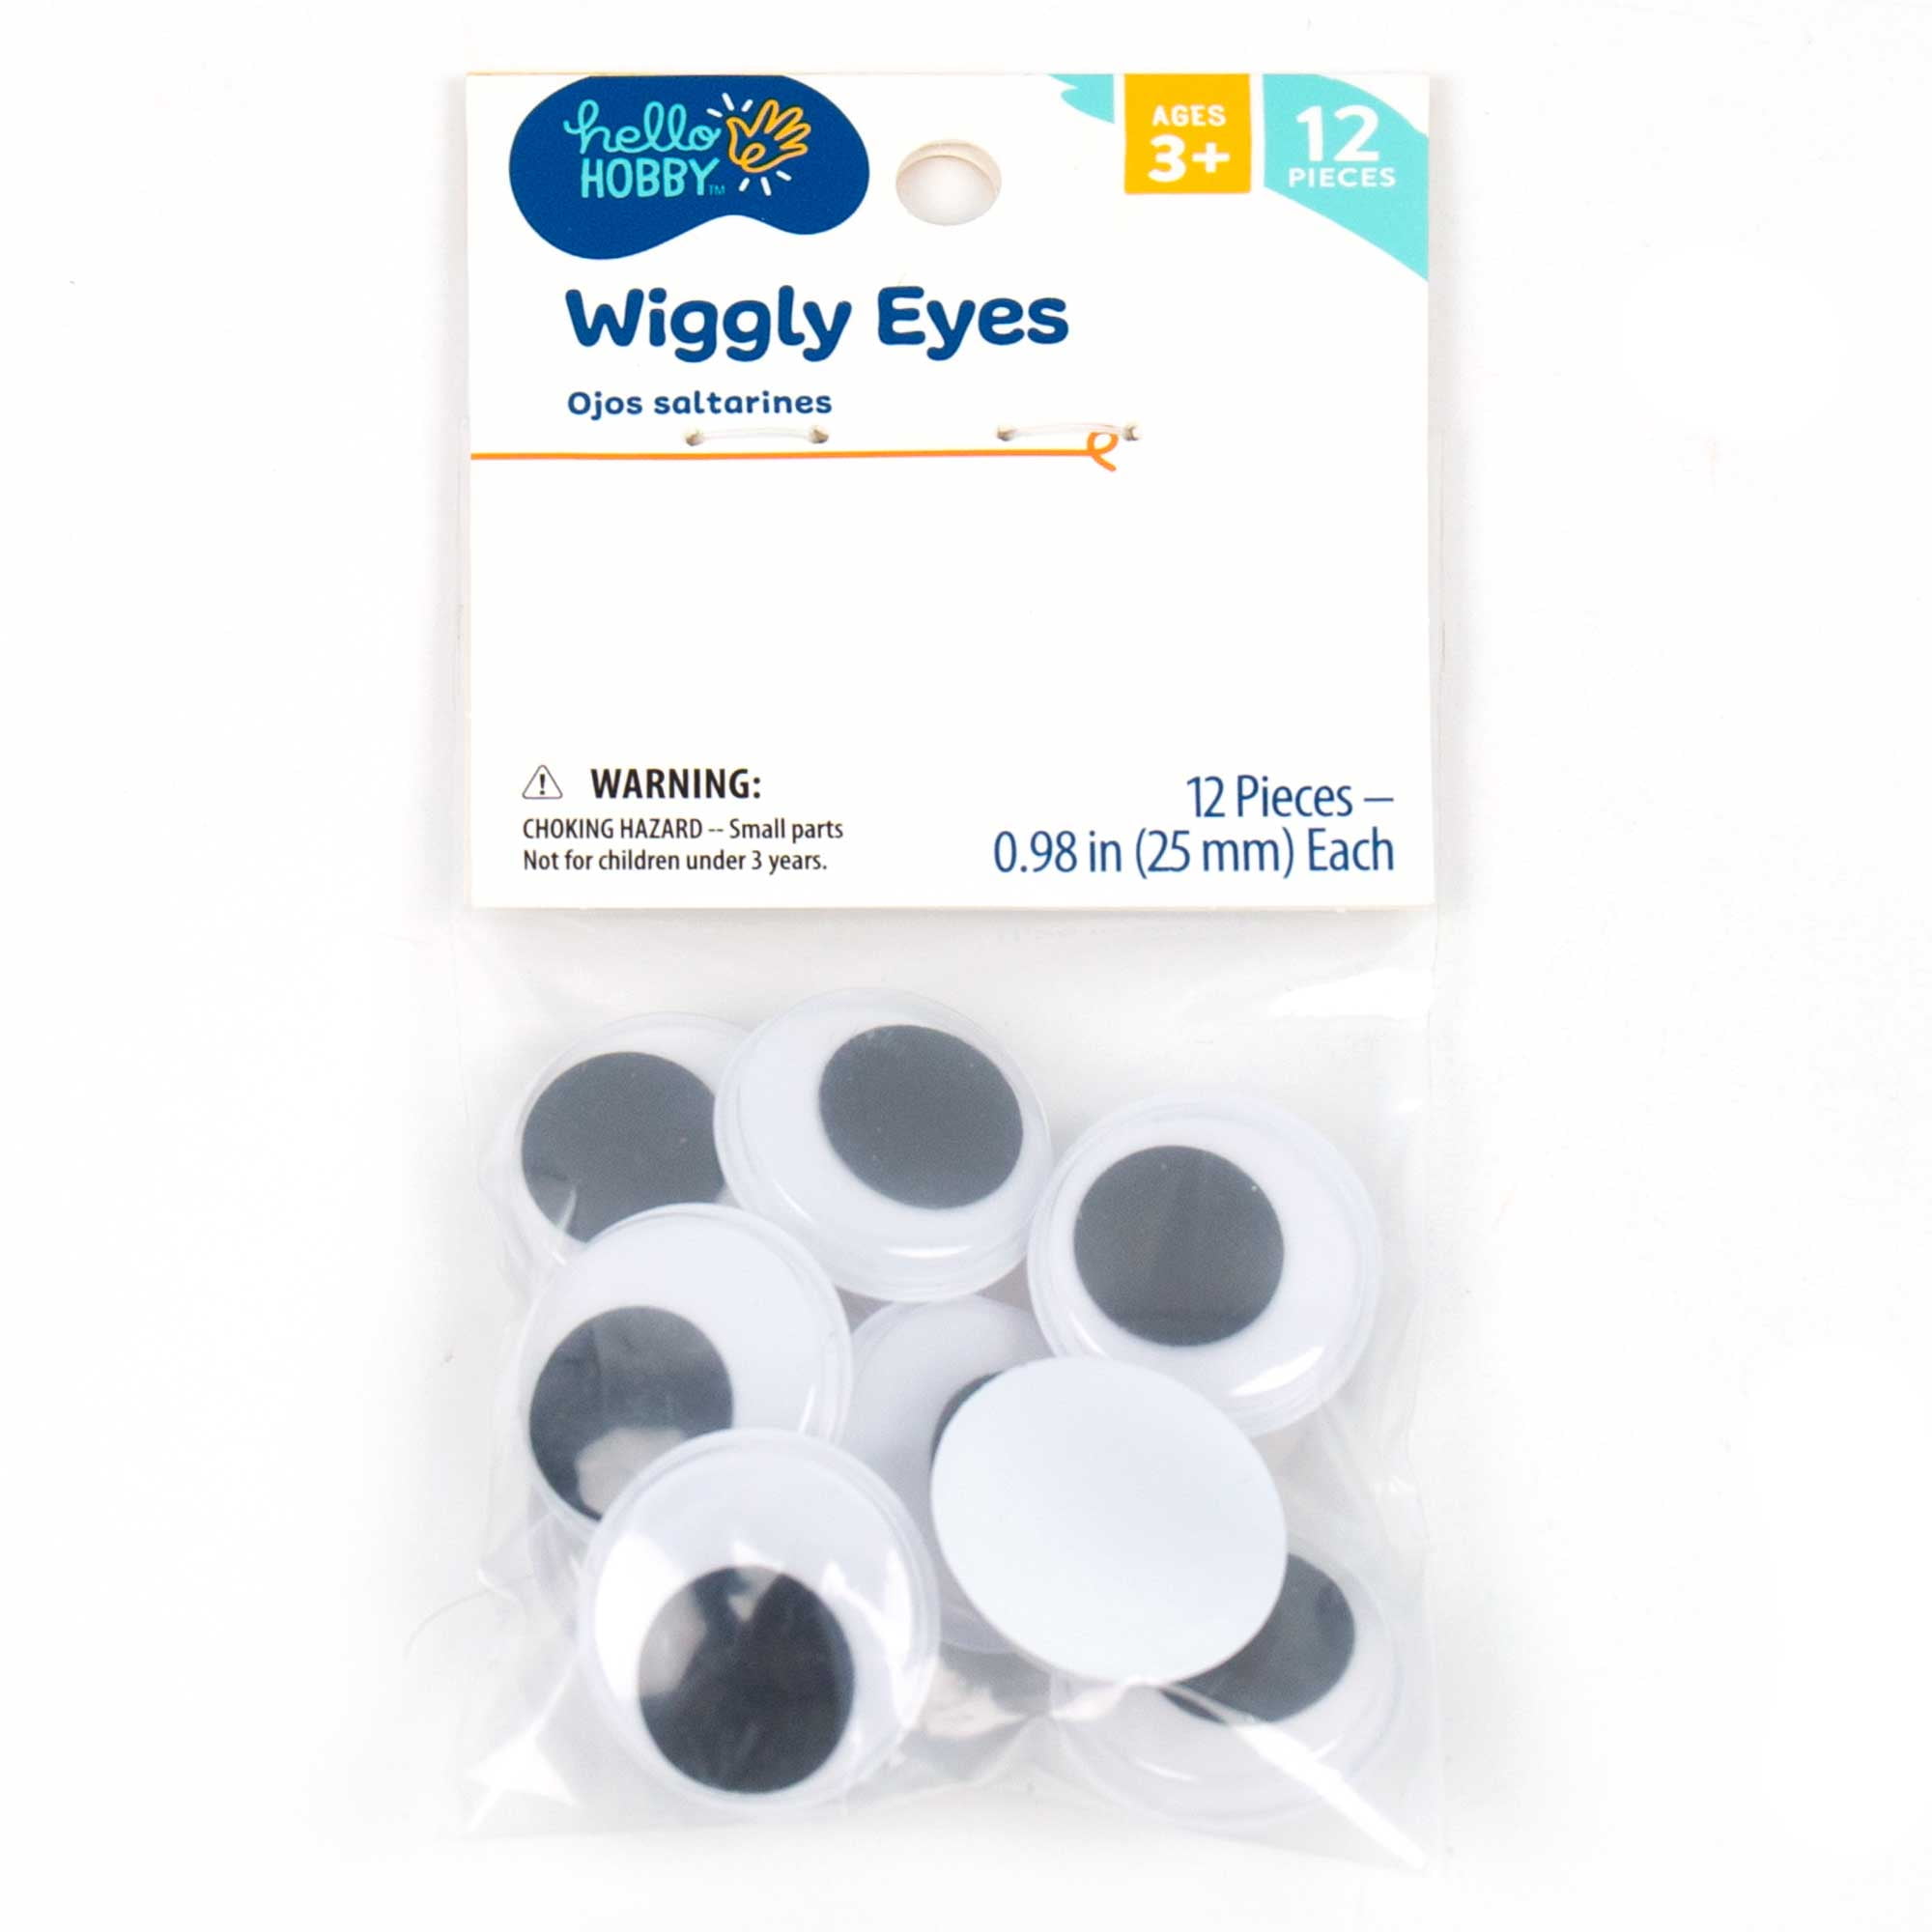 Paste-On Wiggle Eyes, 12 x 8 Millimeters, Black and White, 124 Count, Mardel